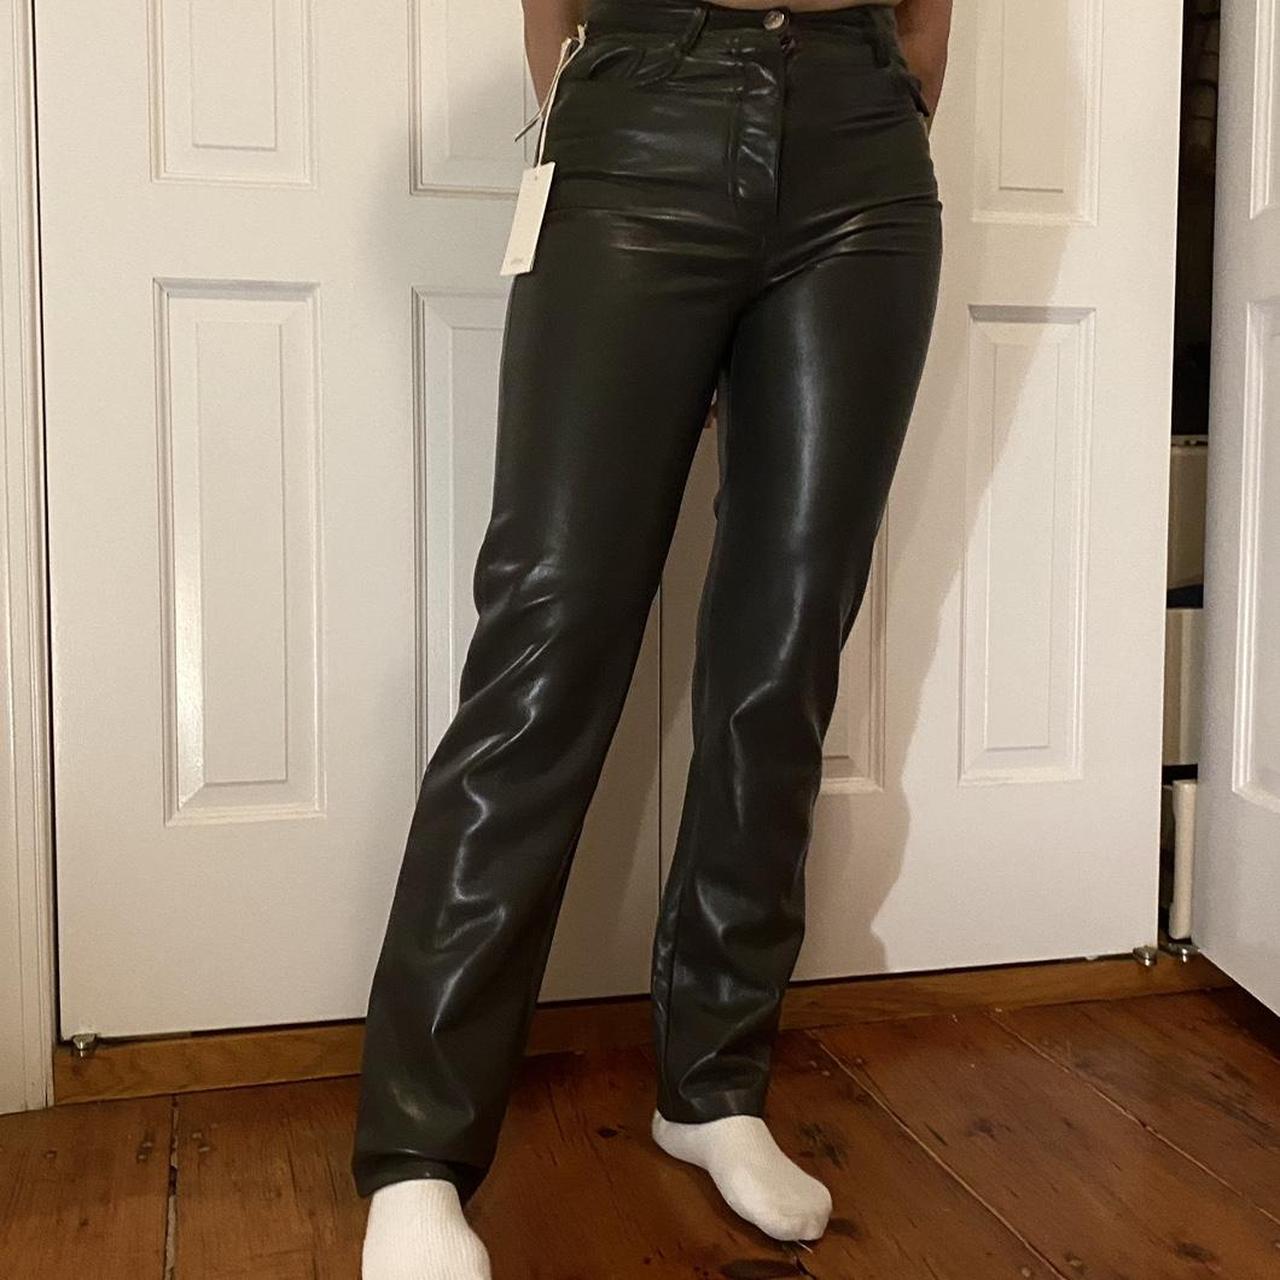 The Wilfred Melina Pant is a high-rise vegan leather pants. And